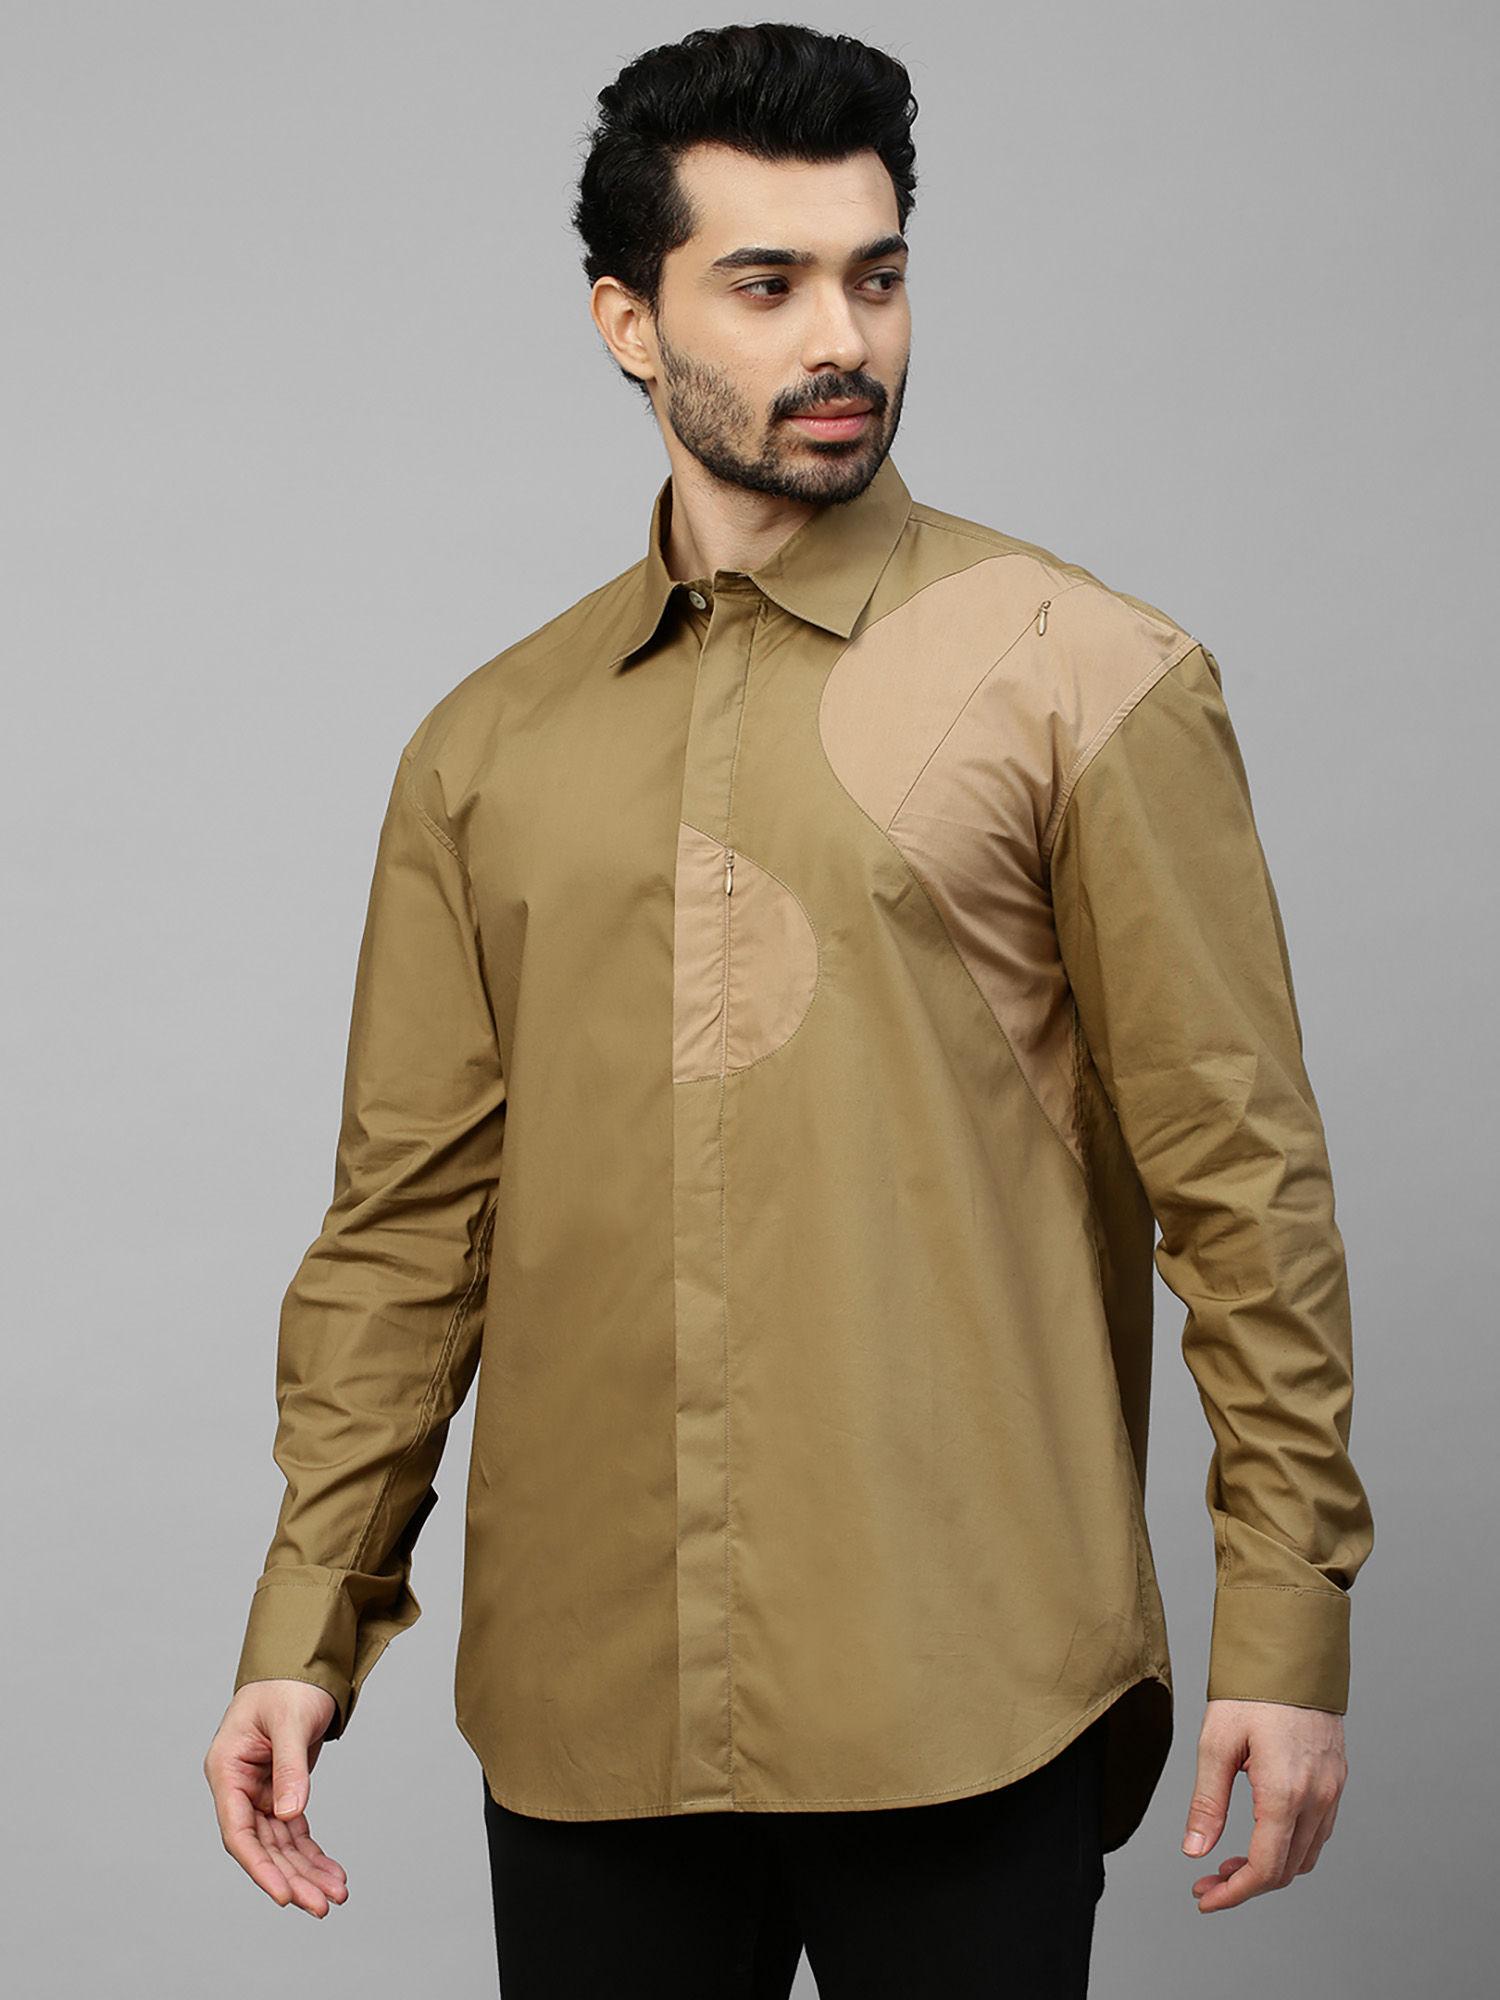 dark khaki shirt with light khaki patch on shoulder and concealed zipper